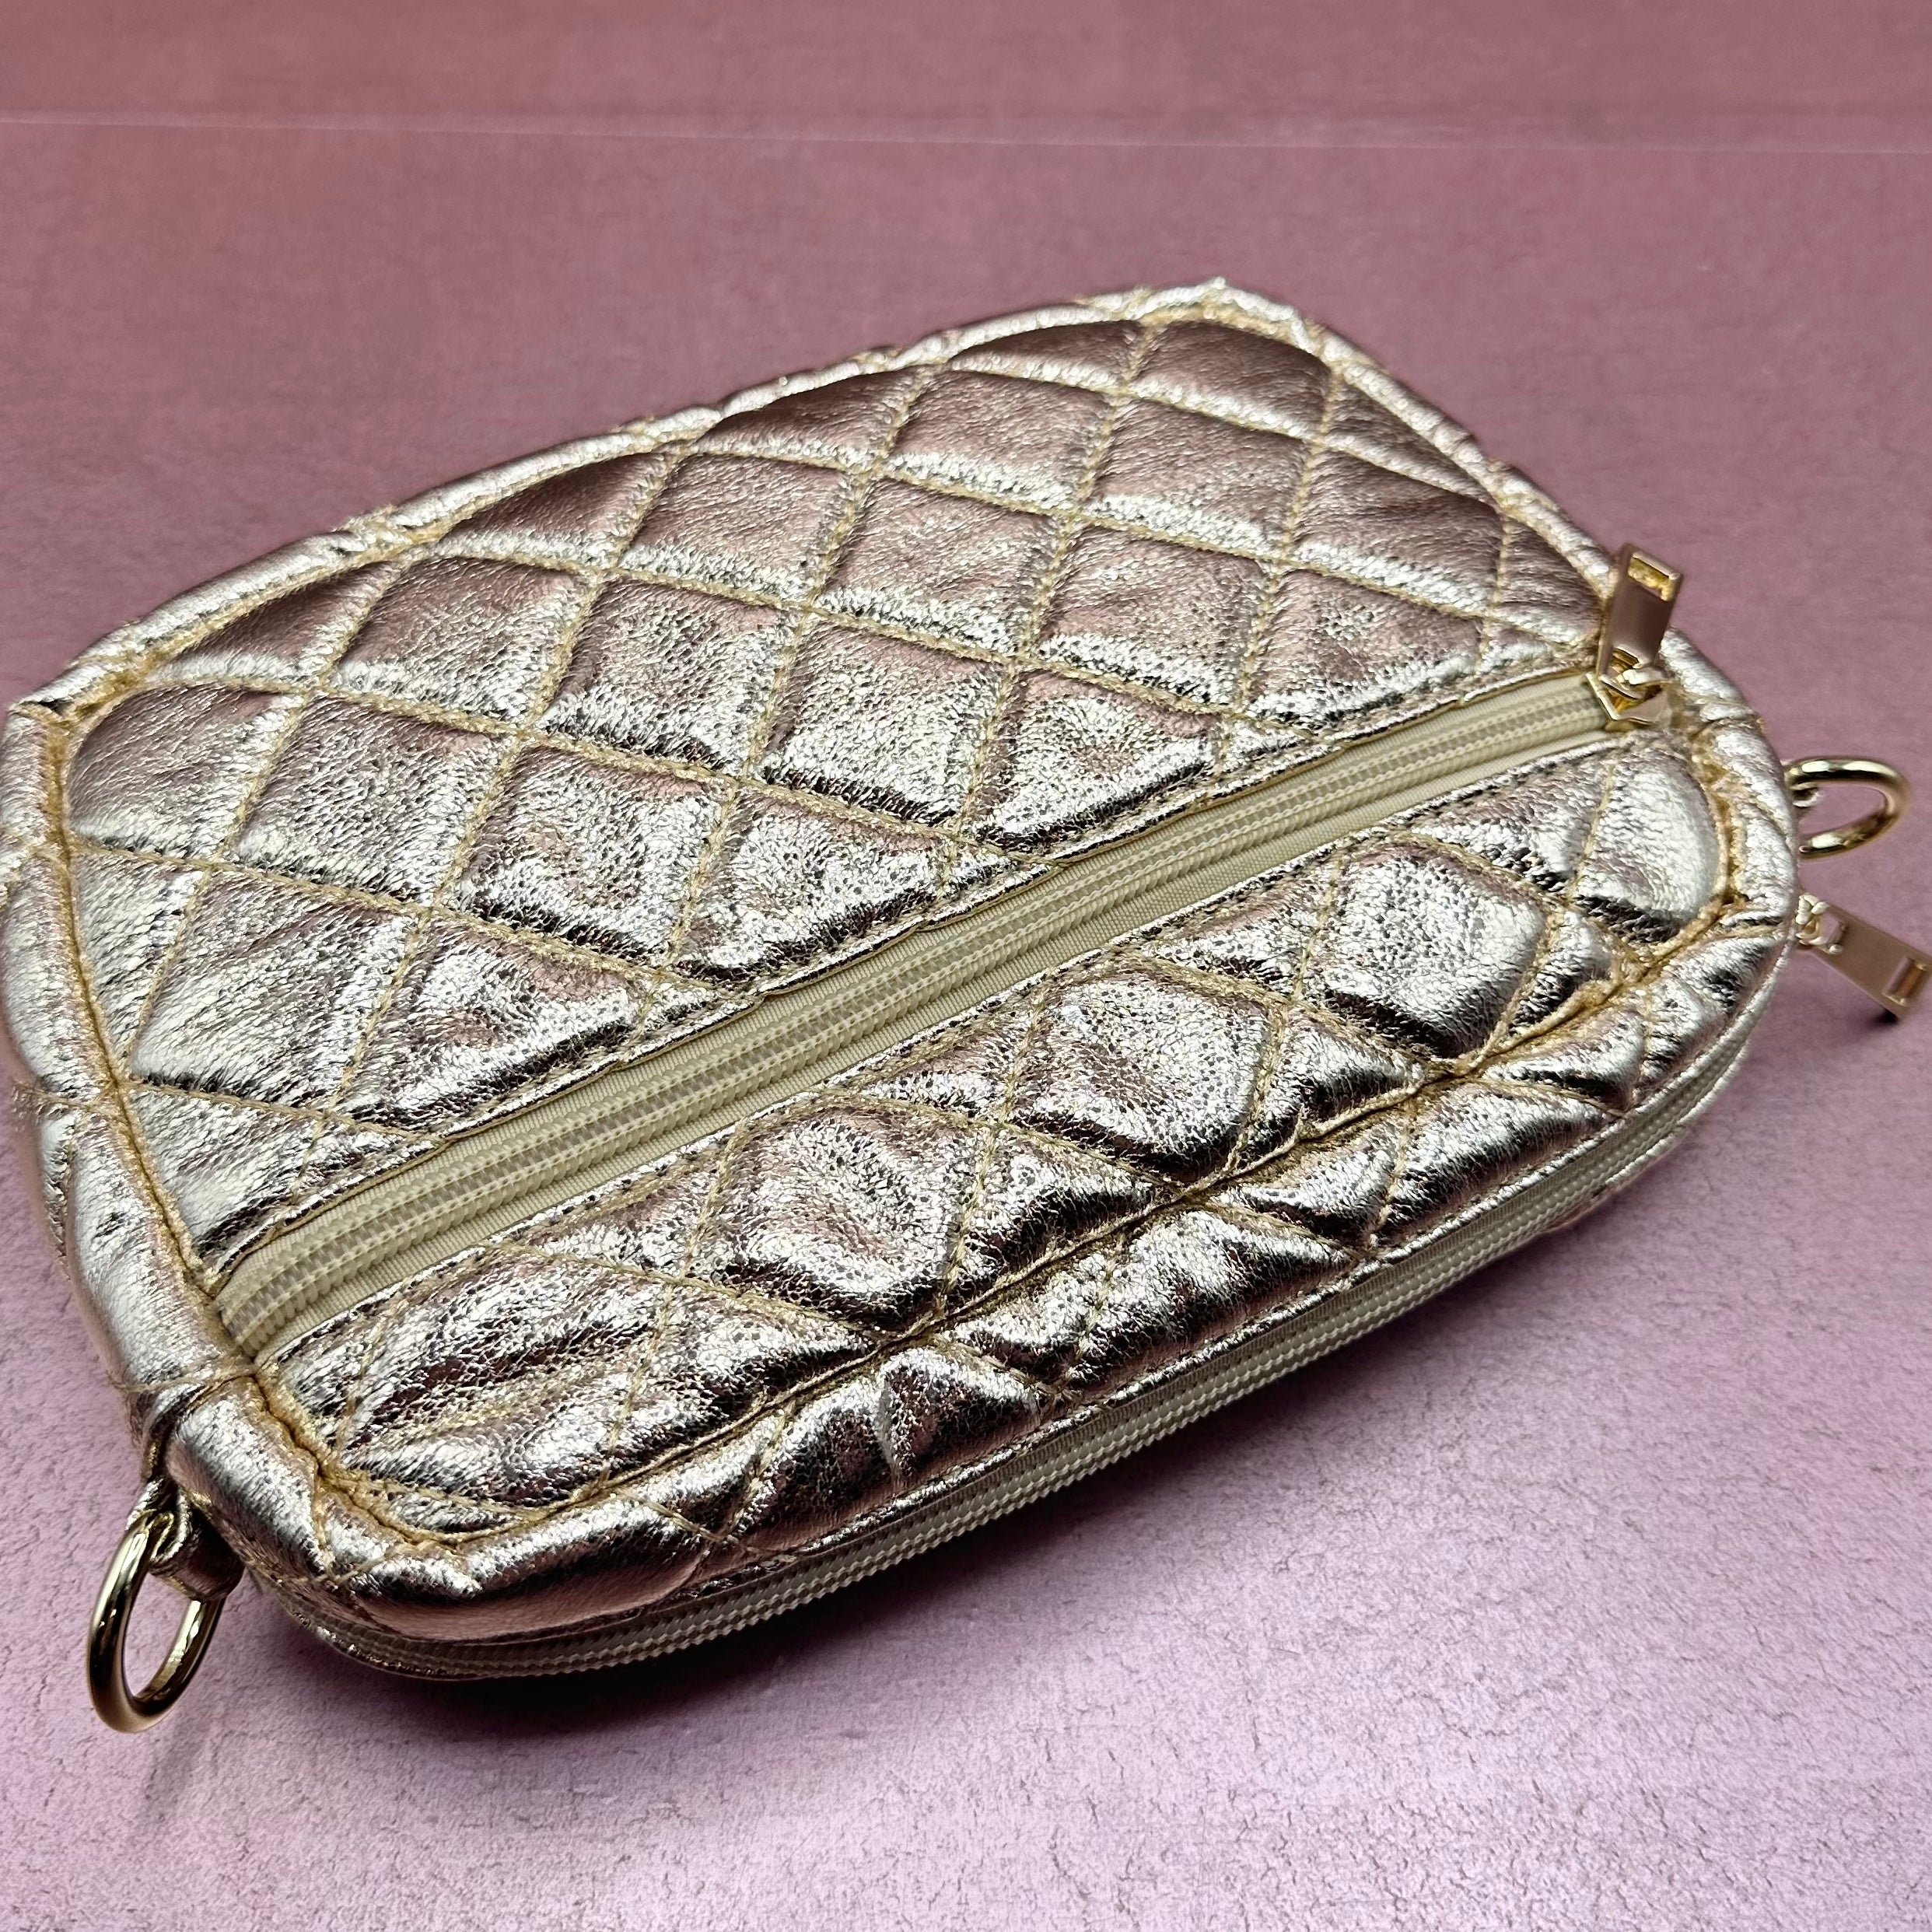 Quilted Crossbody Purse